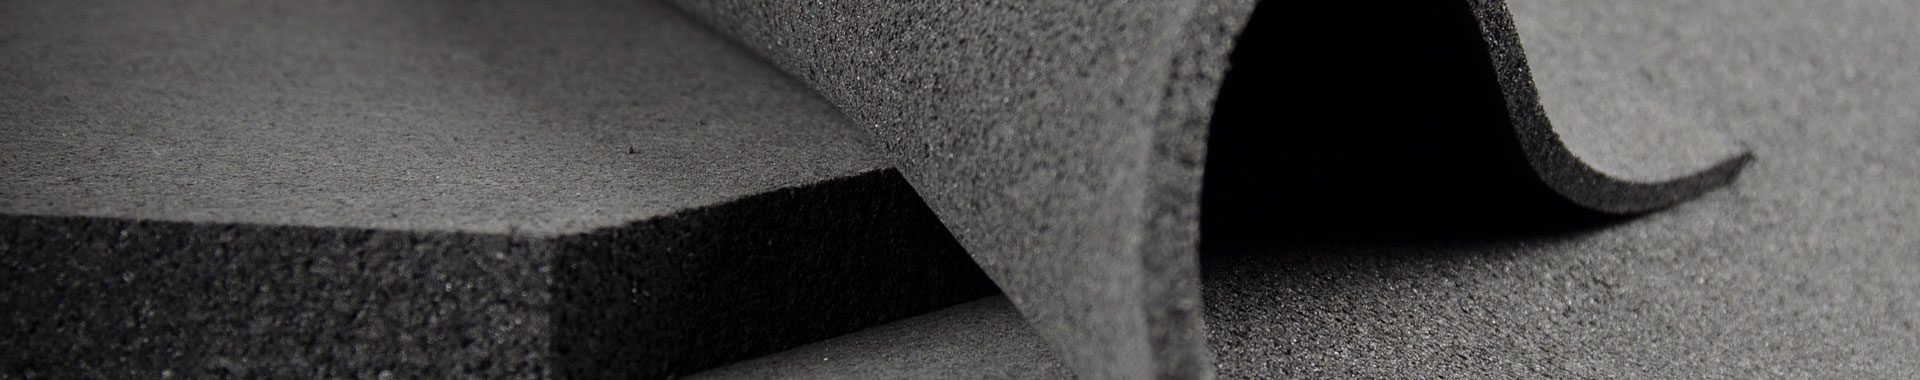 ArmaSound is a highly flexible, open-cell acoustic insulation 